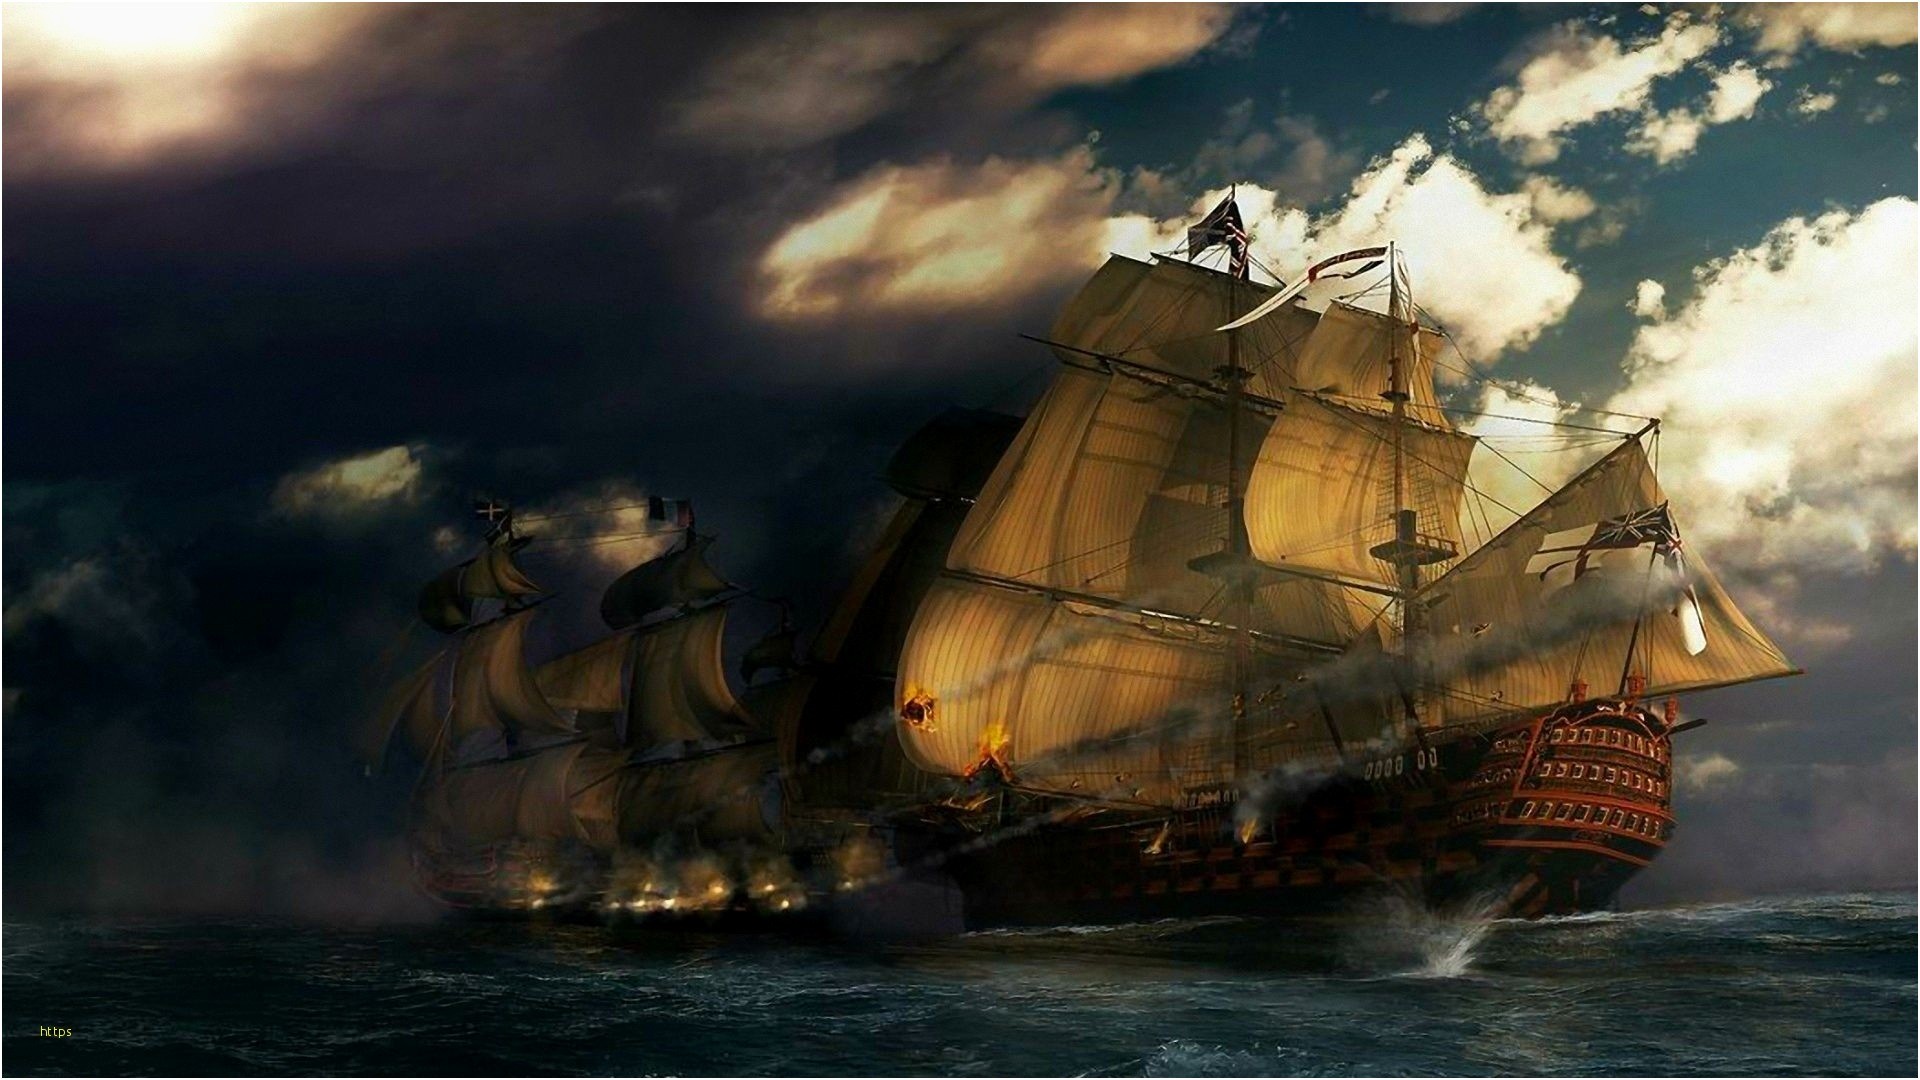 1920x1080 ... Pirate Ship Wallpaper Unique Ship Wallpaper Desktop Awesome 7 Steps In  Traveling From Fear To